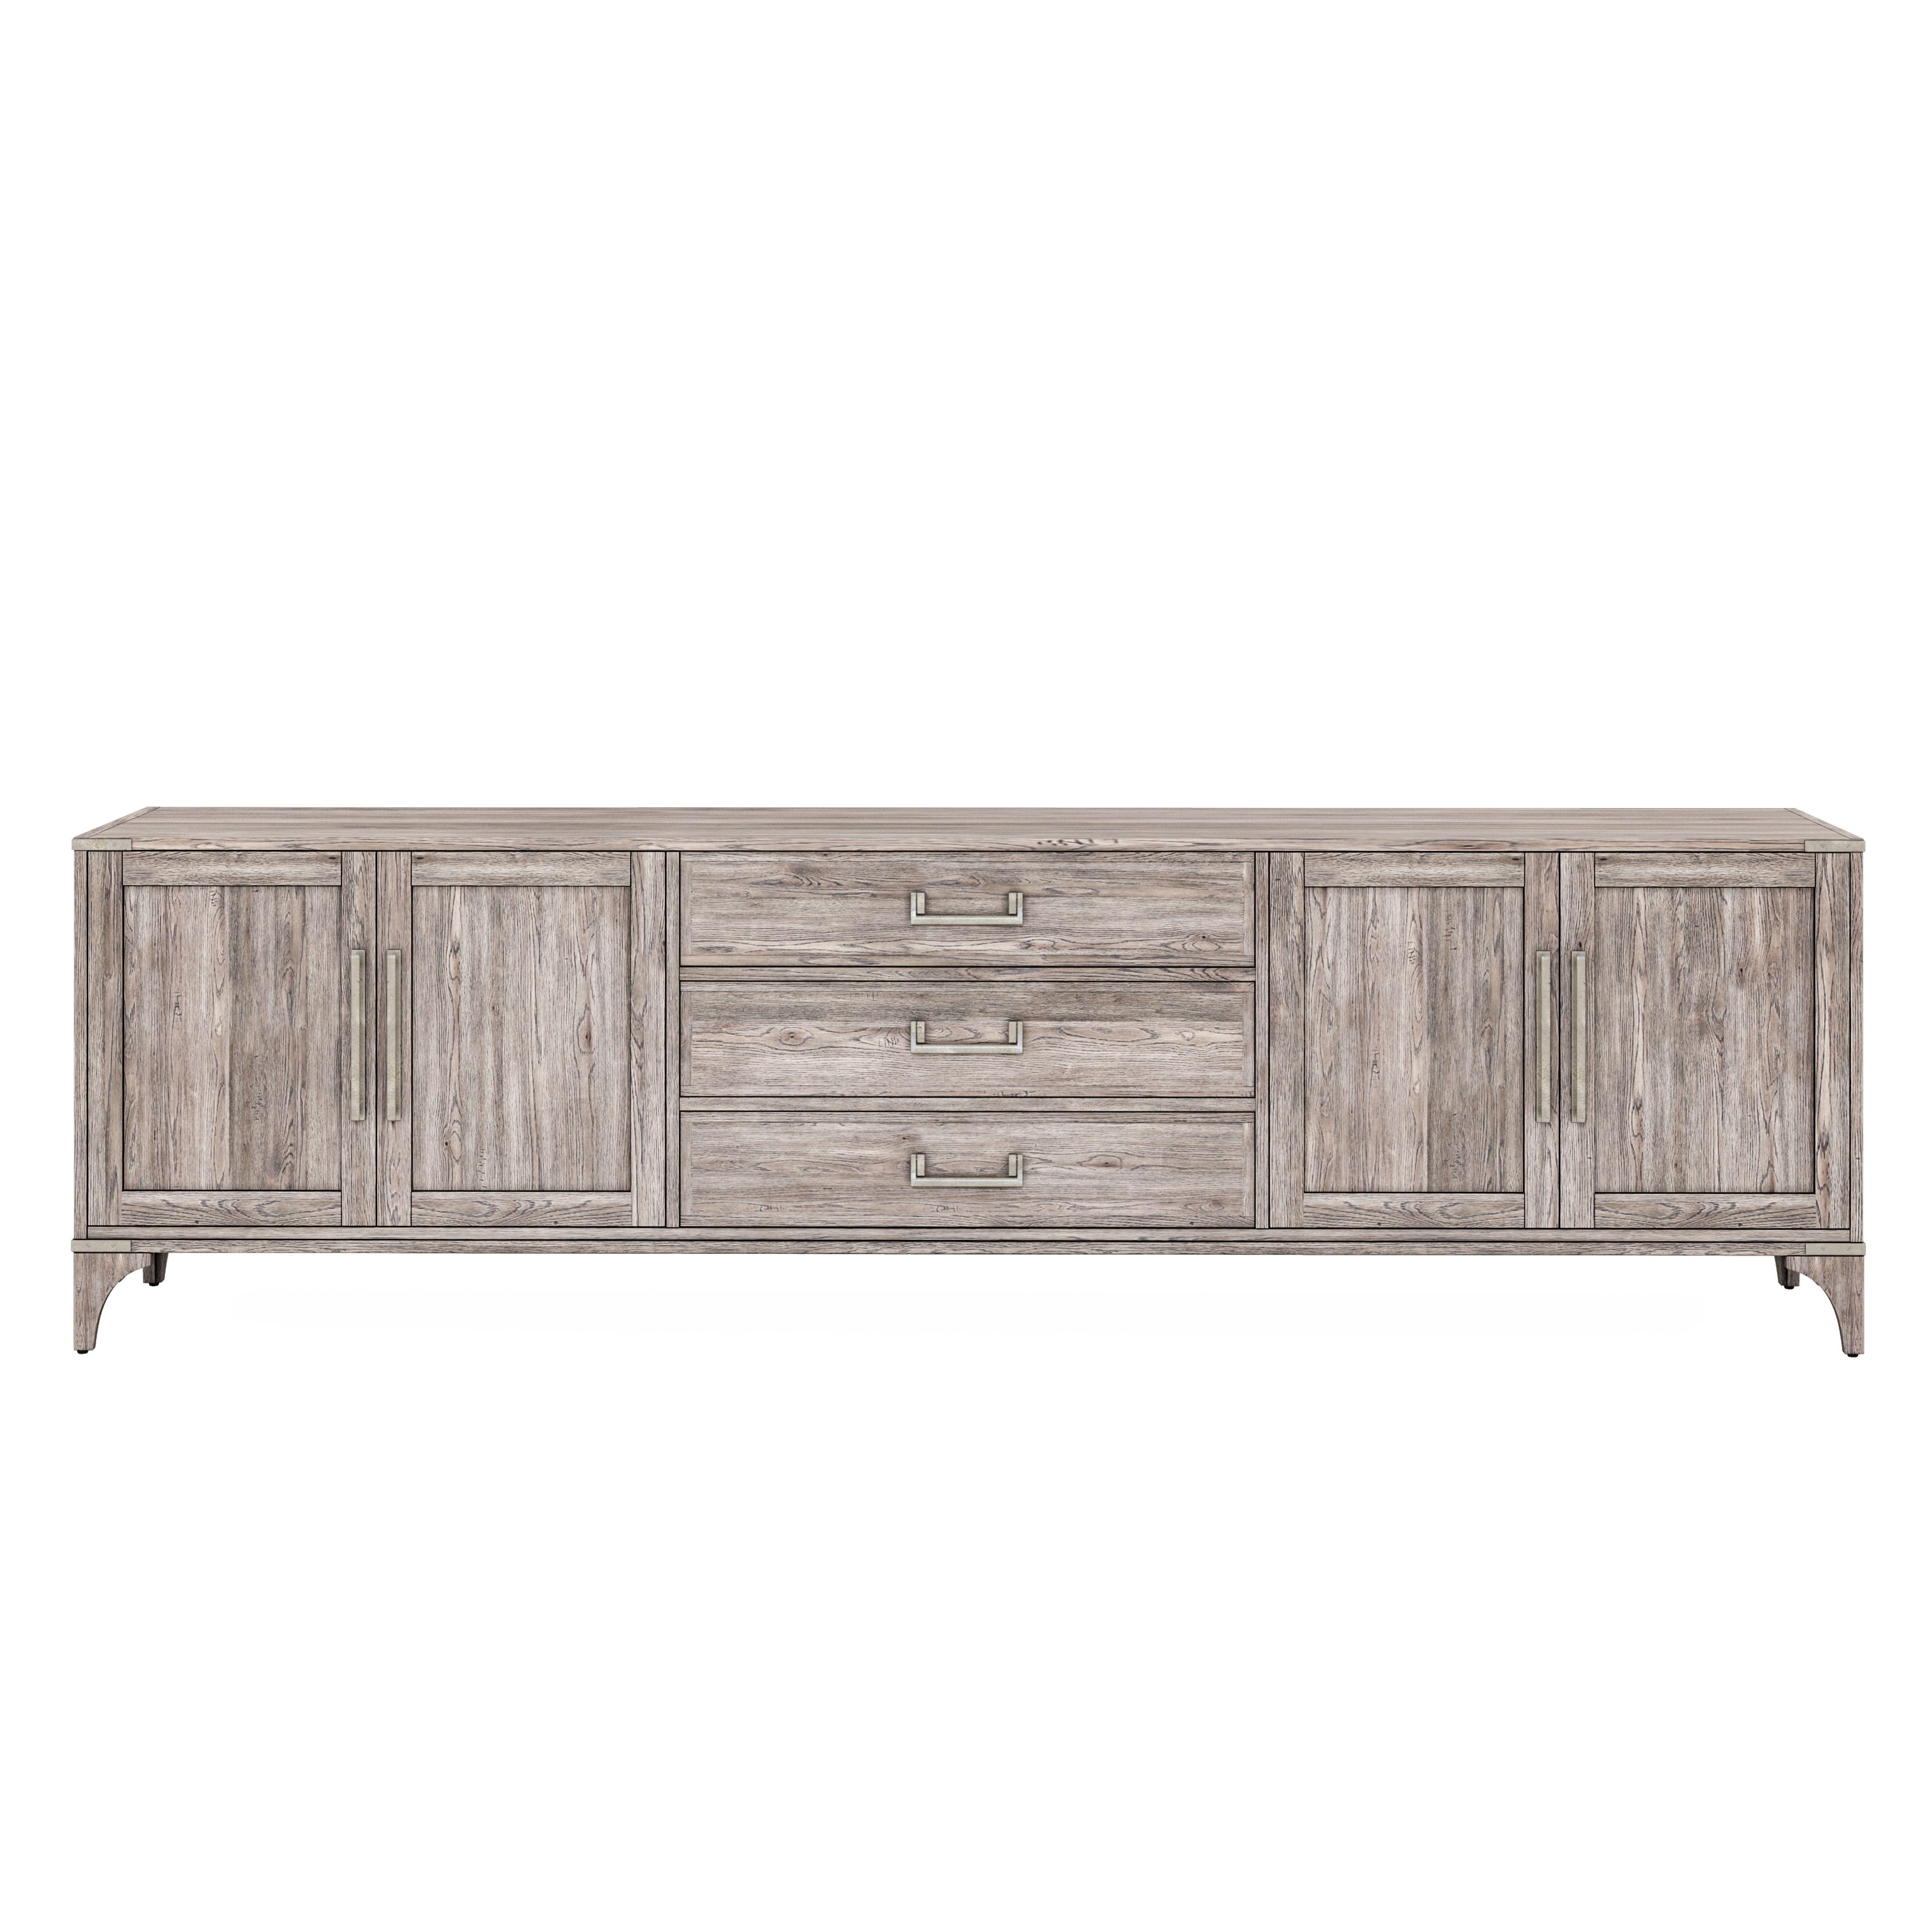 Contemporary Entertainment Console Sojourn 316423-2311 in Beige 